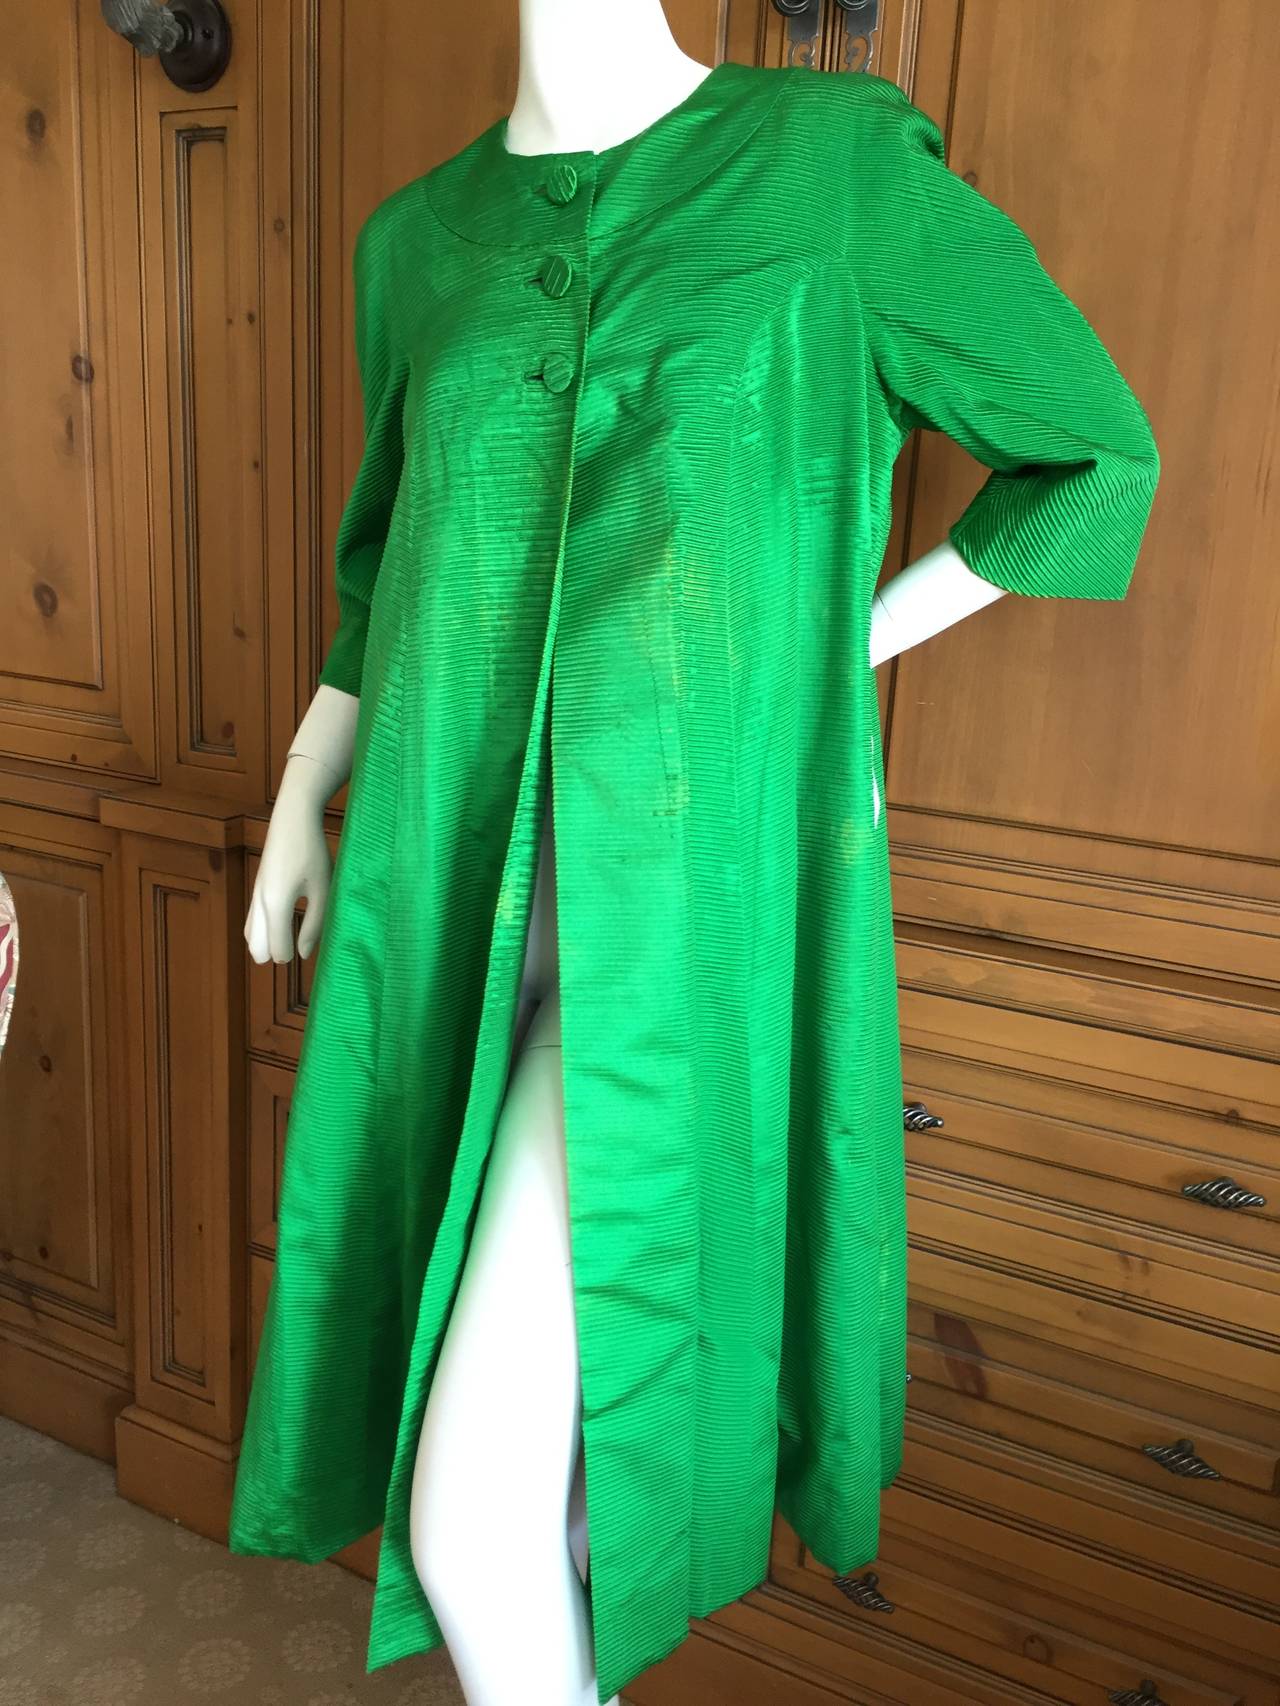 Sophie of Saks Couture 1940 Emerald Green Silk Swing Coat In Good Condition For Sale In Cloverdale, CA